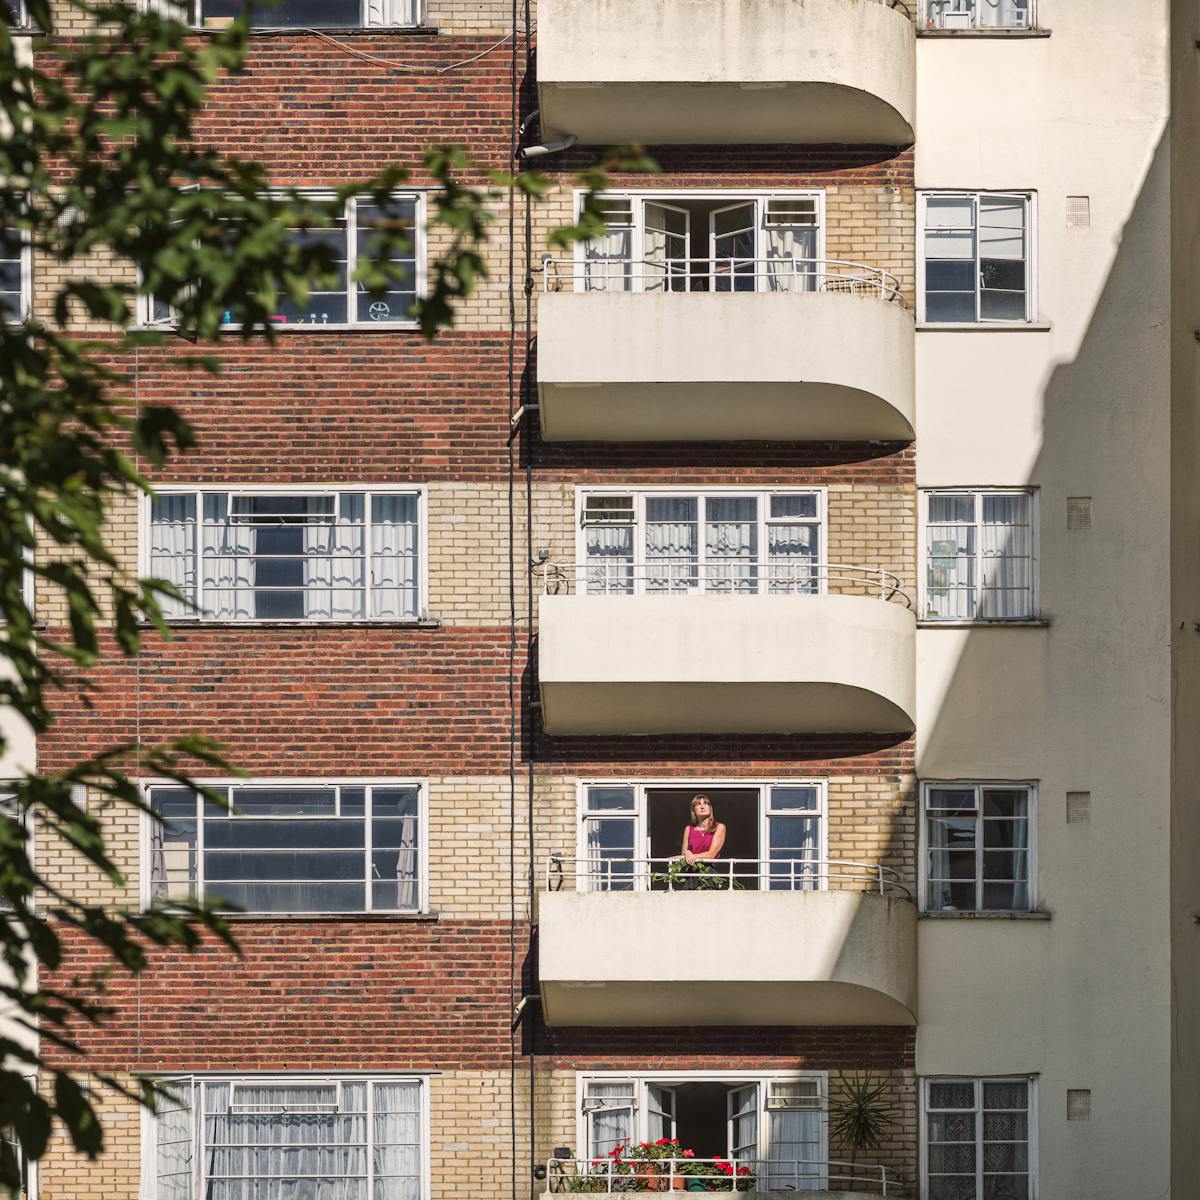 Photograph of an Art-Deco style 1930’s residential building, with alternating red and yellow brick floors.  Captured with a long lens from a distance.  On second balcony from the bottom there is a woman in a red blouse standing with her hands on the railings.  A hard shadow cast by the sun covers one third of the building.  The canopy of a tree partly obscures the left side of the frame.